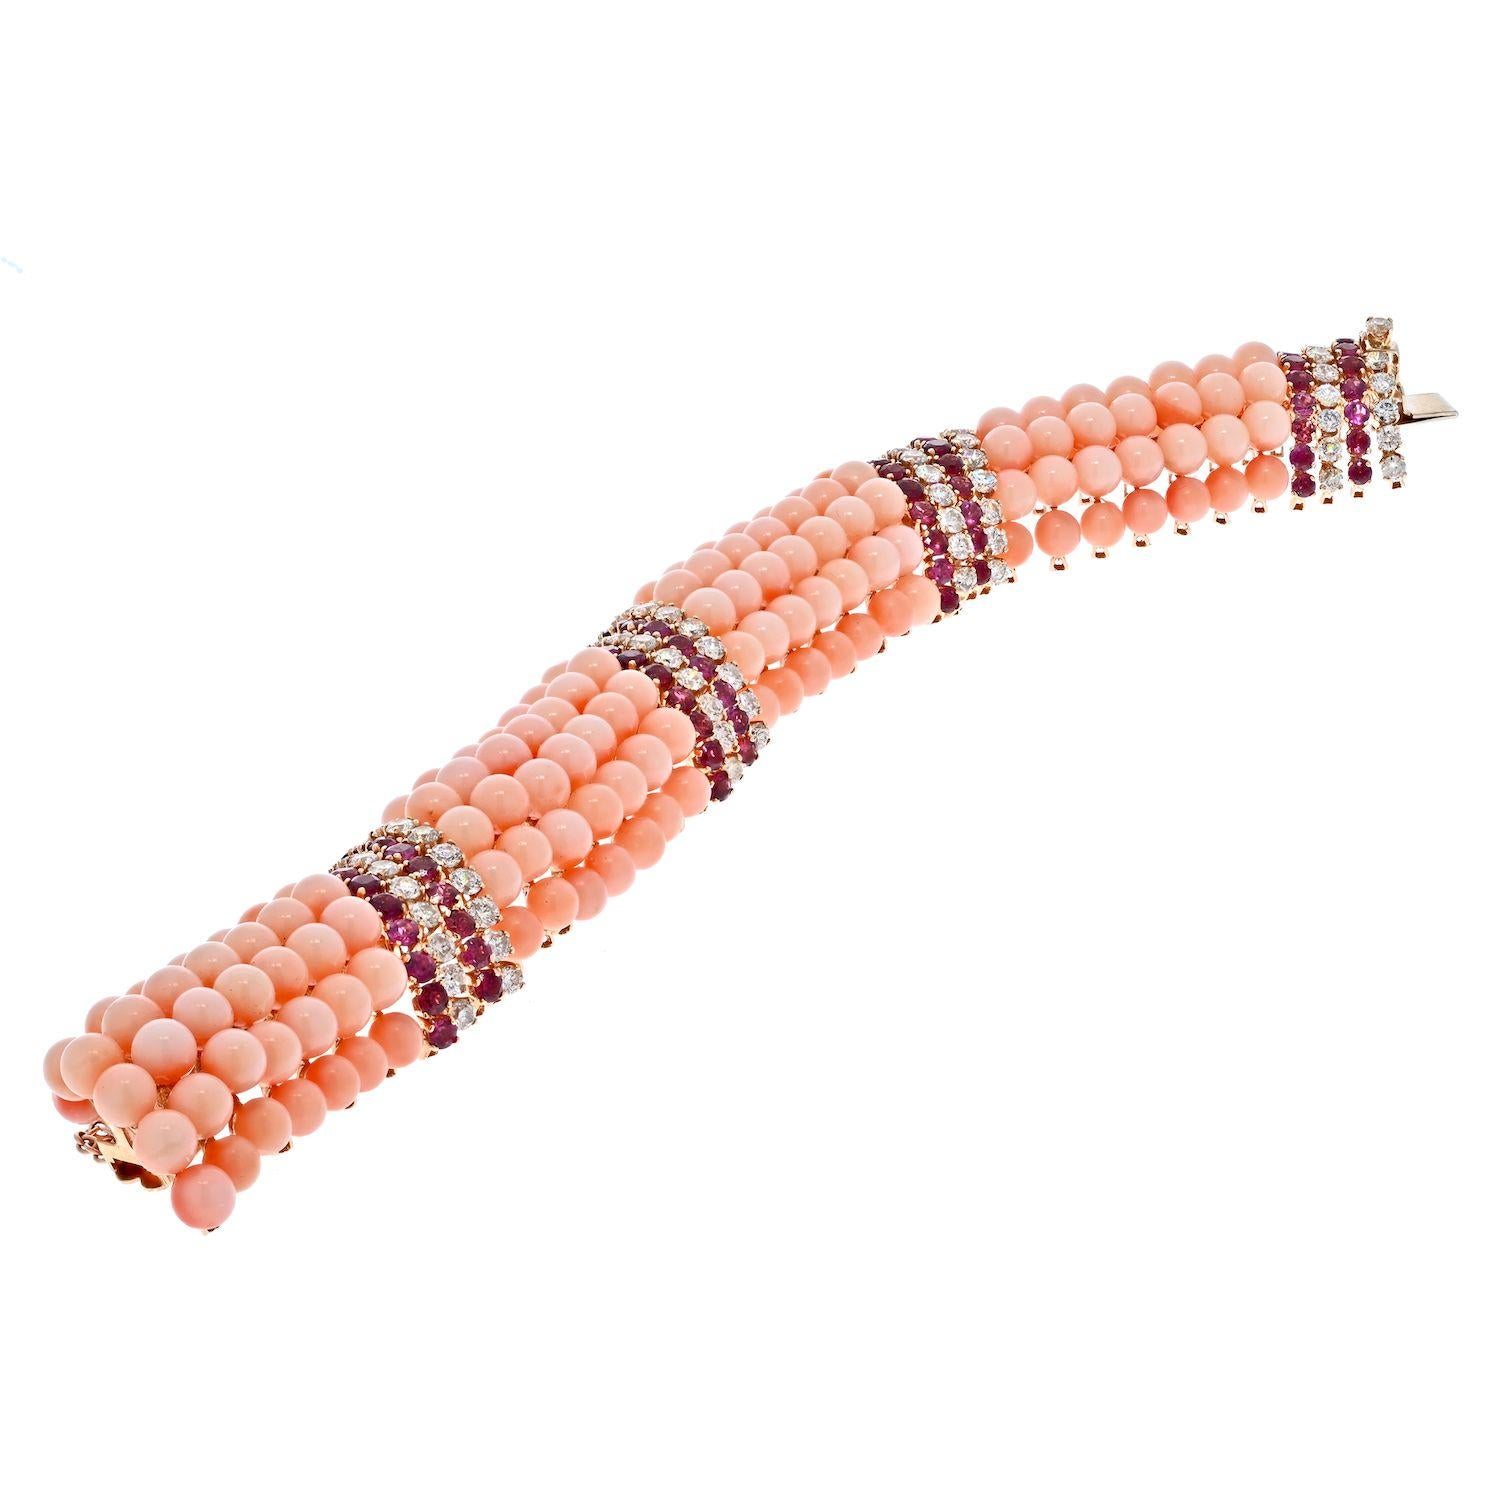 Amazing retrò bracelet in 14 karat rose gold structure mounted with 4 sections of spheres of pink coral and,between of them, rows of garnets and diamonds.
This bracelet was totally handmade by Italian master goldsmiths and it is in perfect